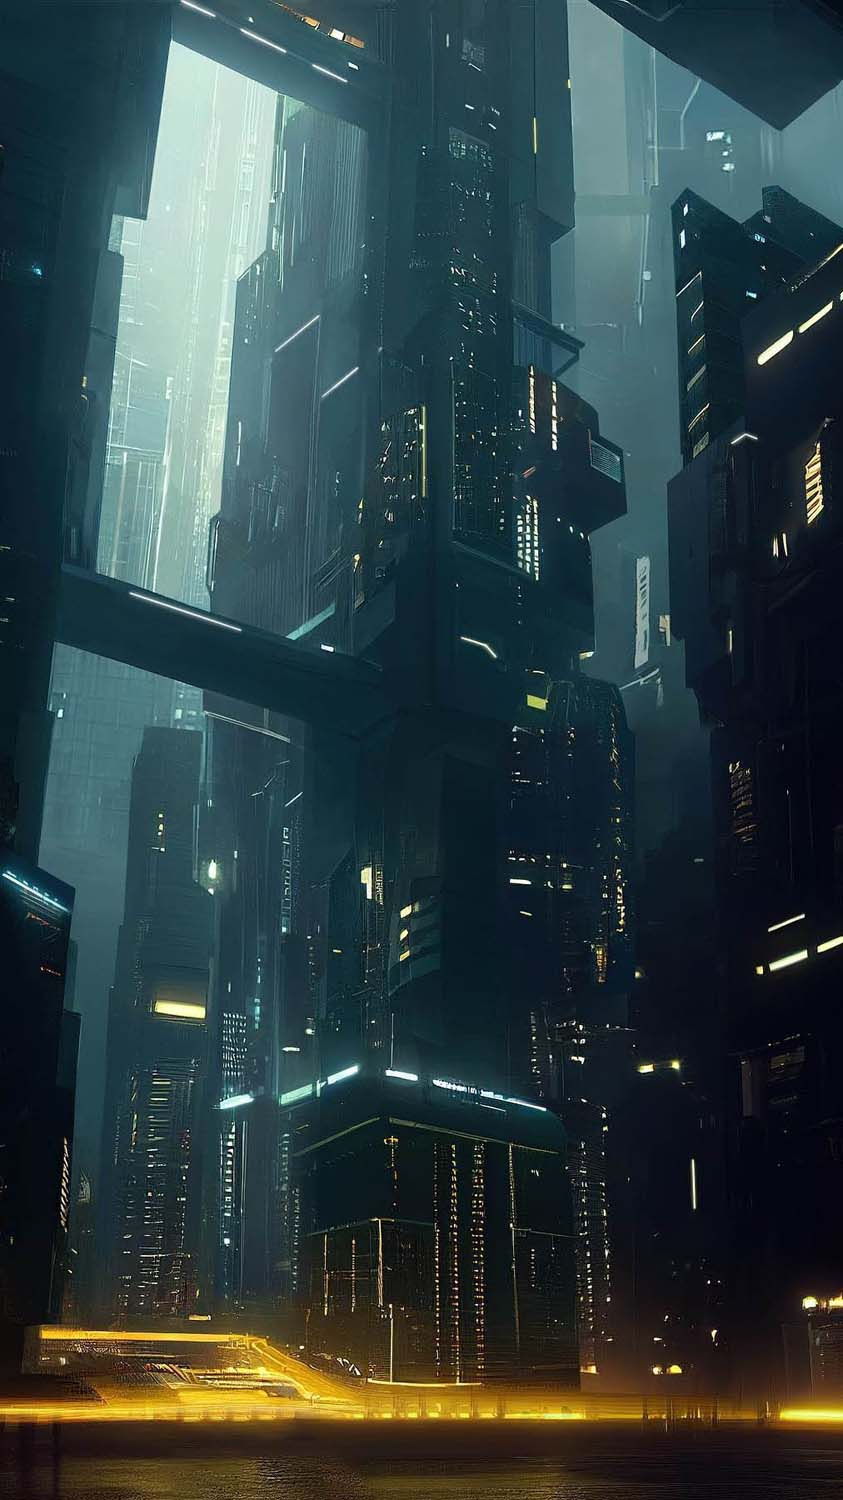 Cyber City IPhone Wallpaper HD  IPhone Wallpapers